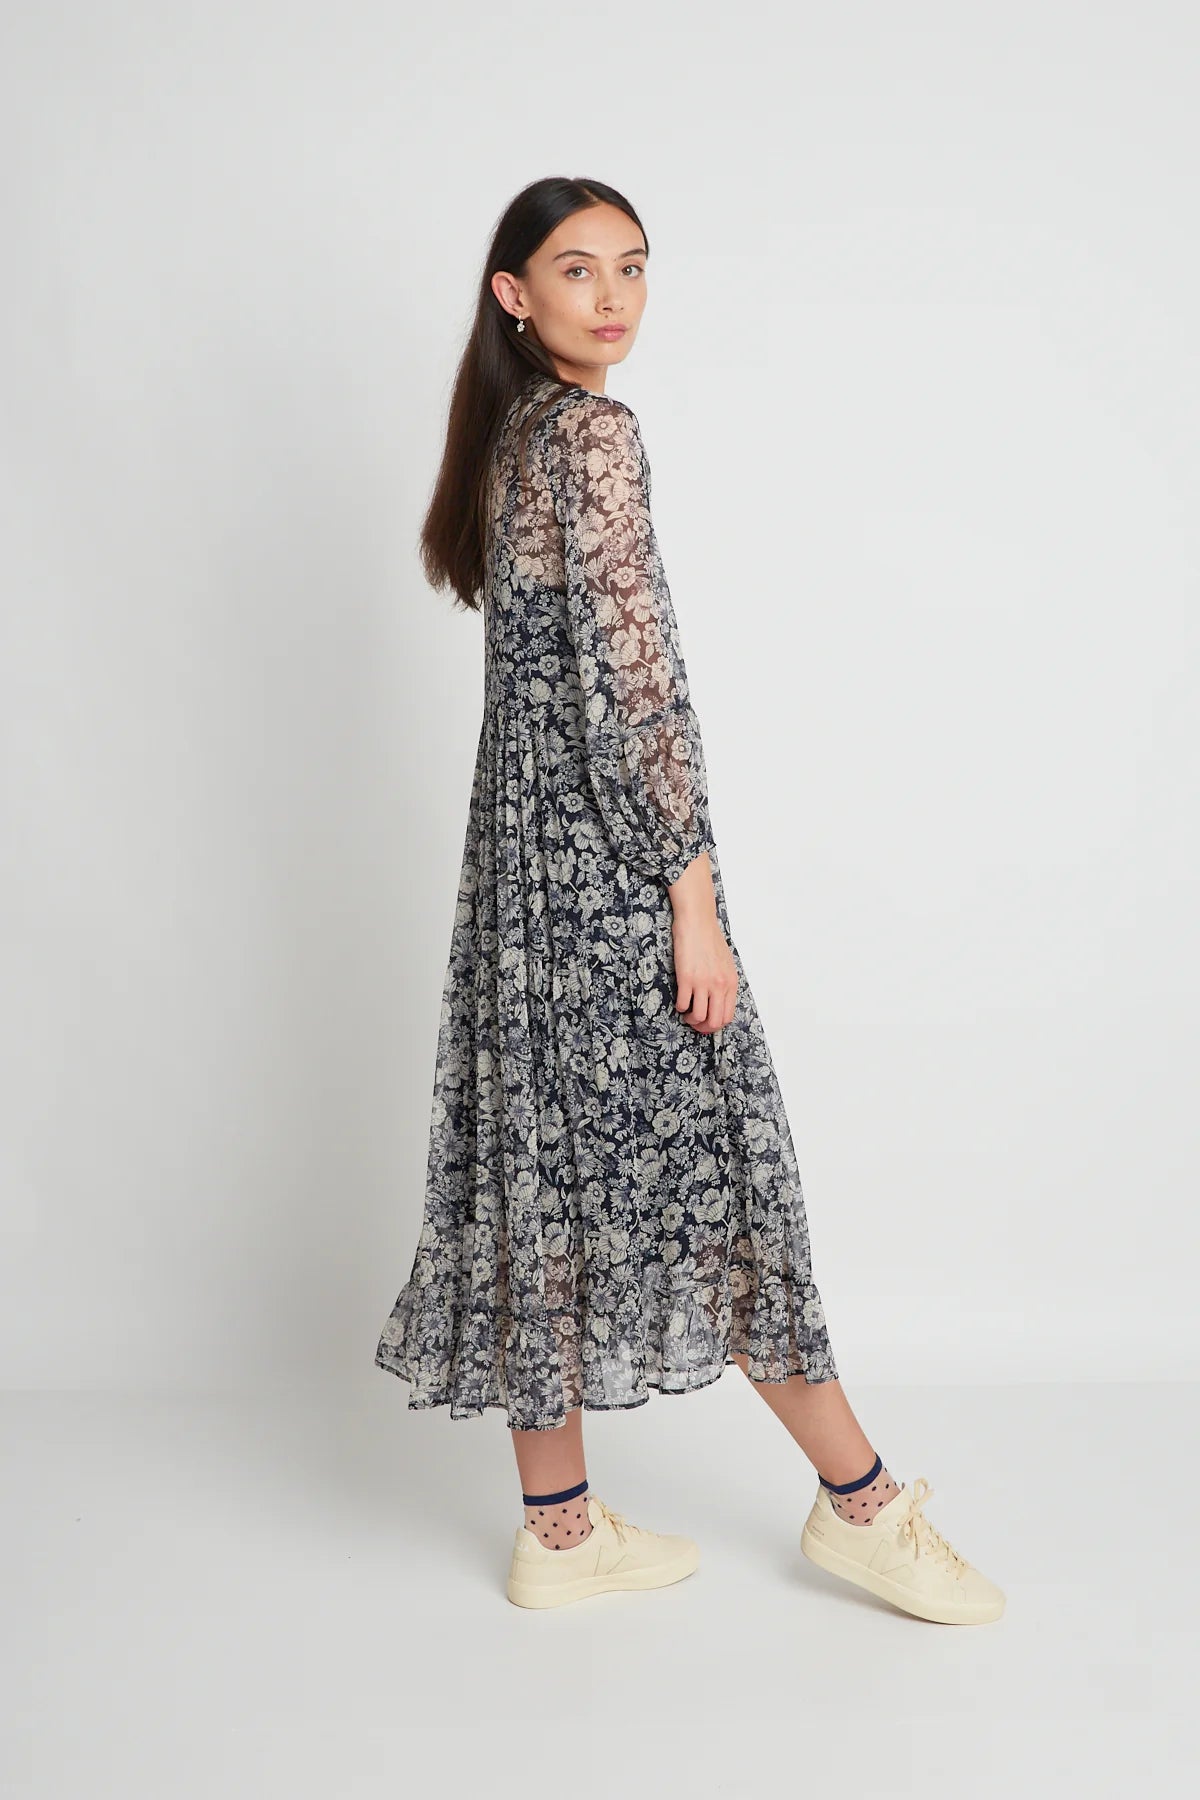 twenty-seven names | The Very Thought of You Dress | Navy Stencil Floral | Palm Boutique